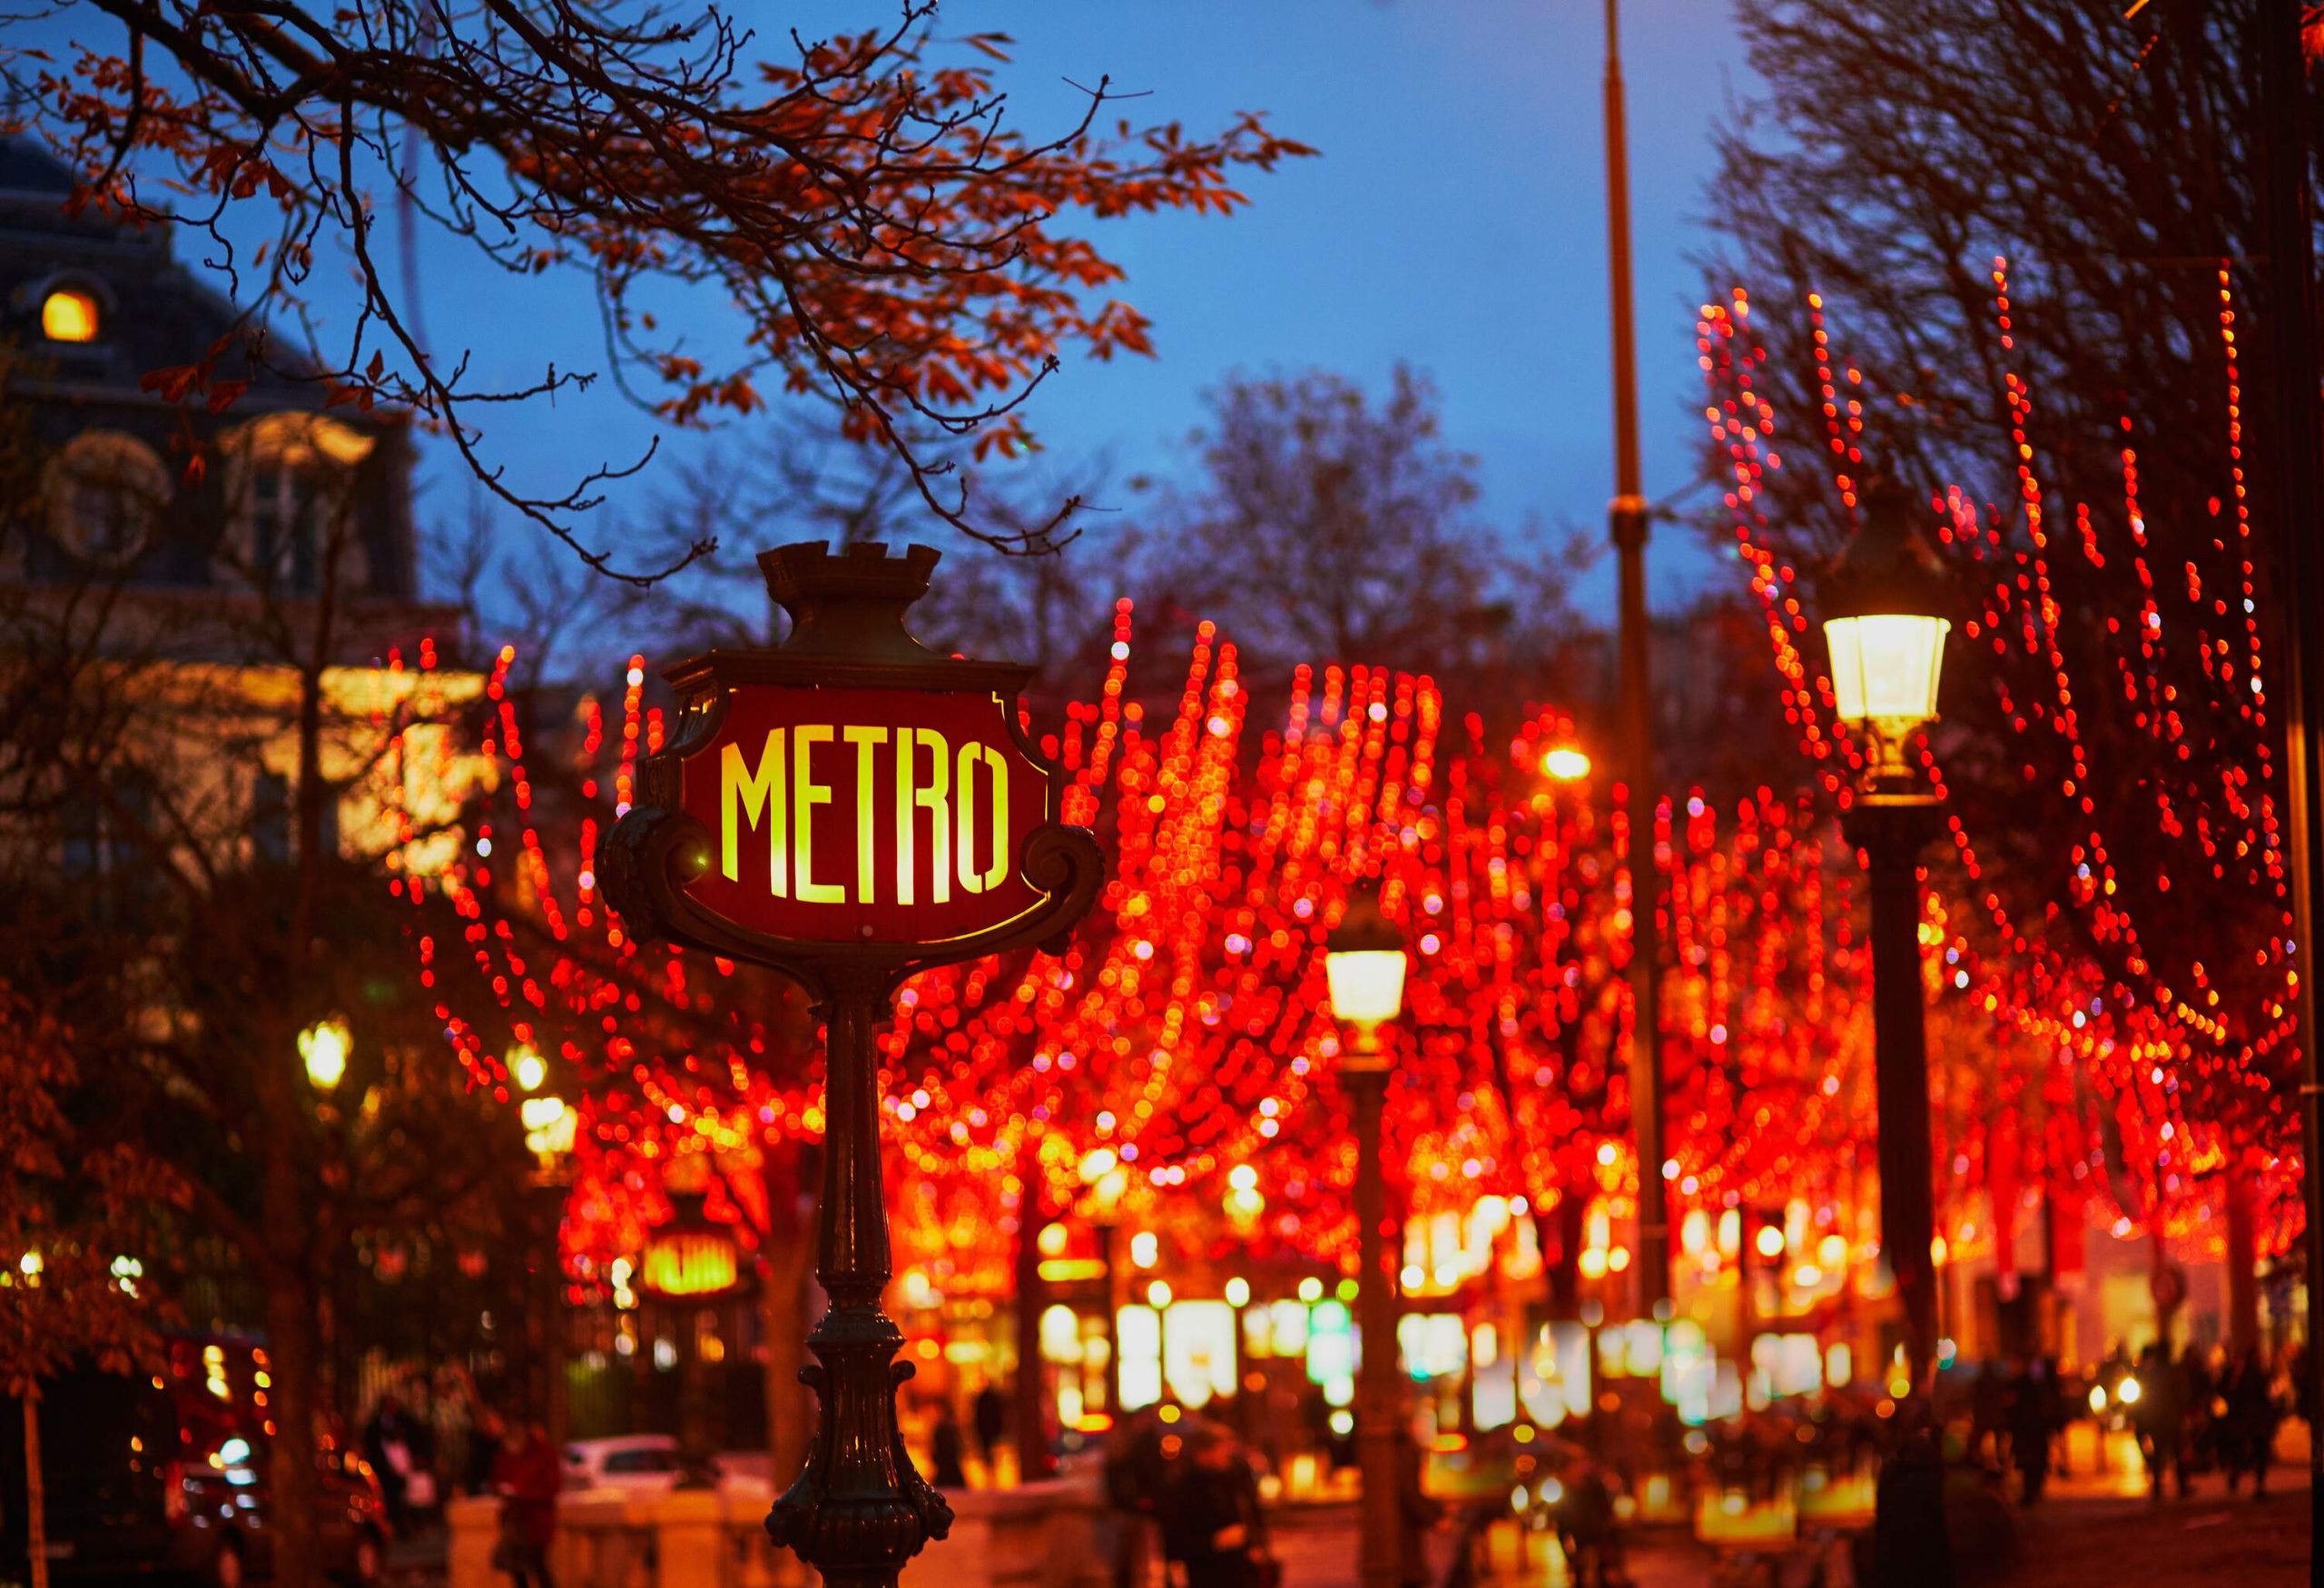 Subway station sign and seasonal holiday illumination on Champs Elysees street in Paris, France. Celebrating Christmas and New Year in French capital